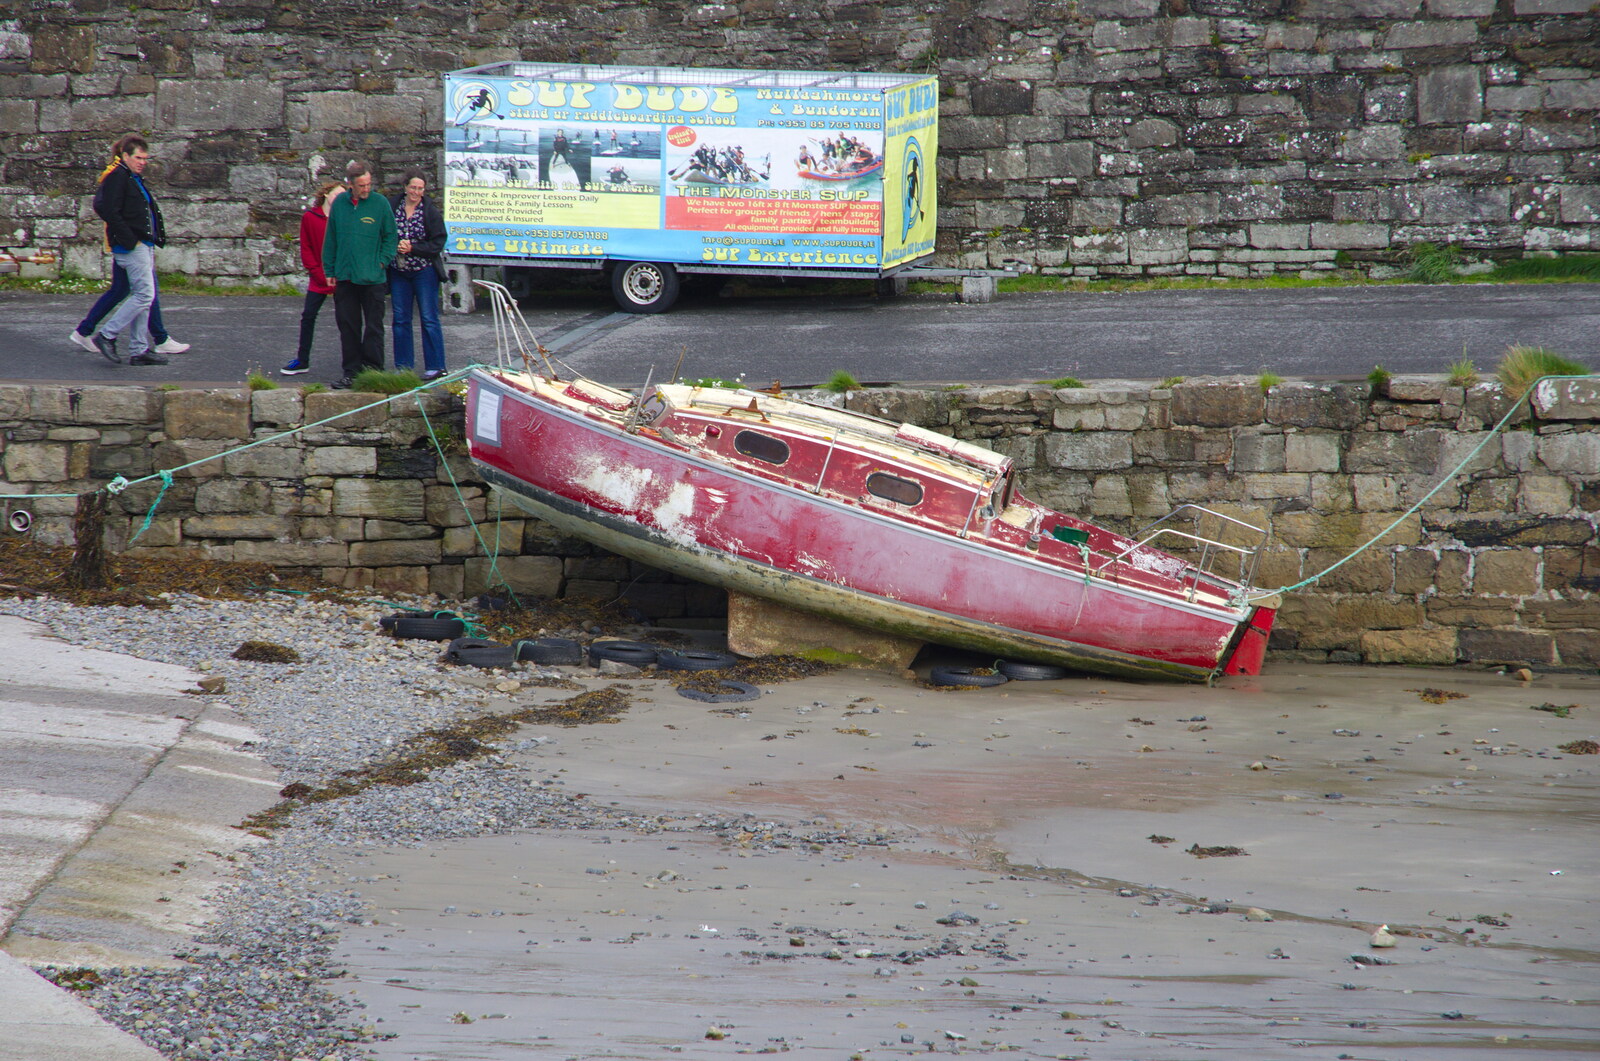 A derelict boat from Mullaghmore Beach and Marble Arch Caves, Sligo and Fermanagh, Ireland - 19th August 2019